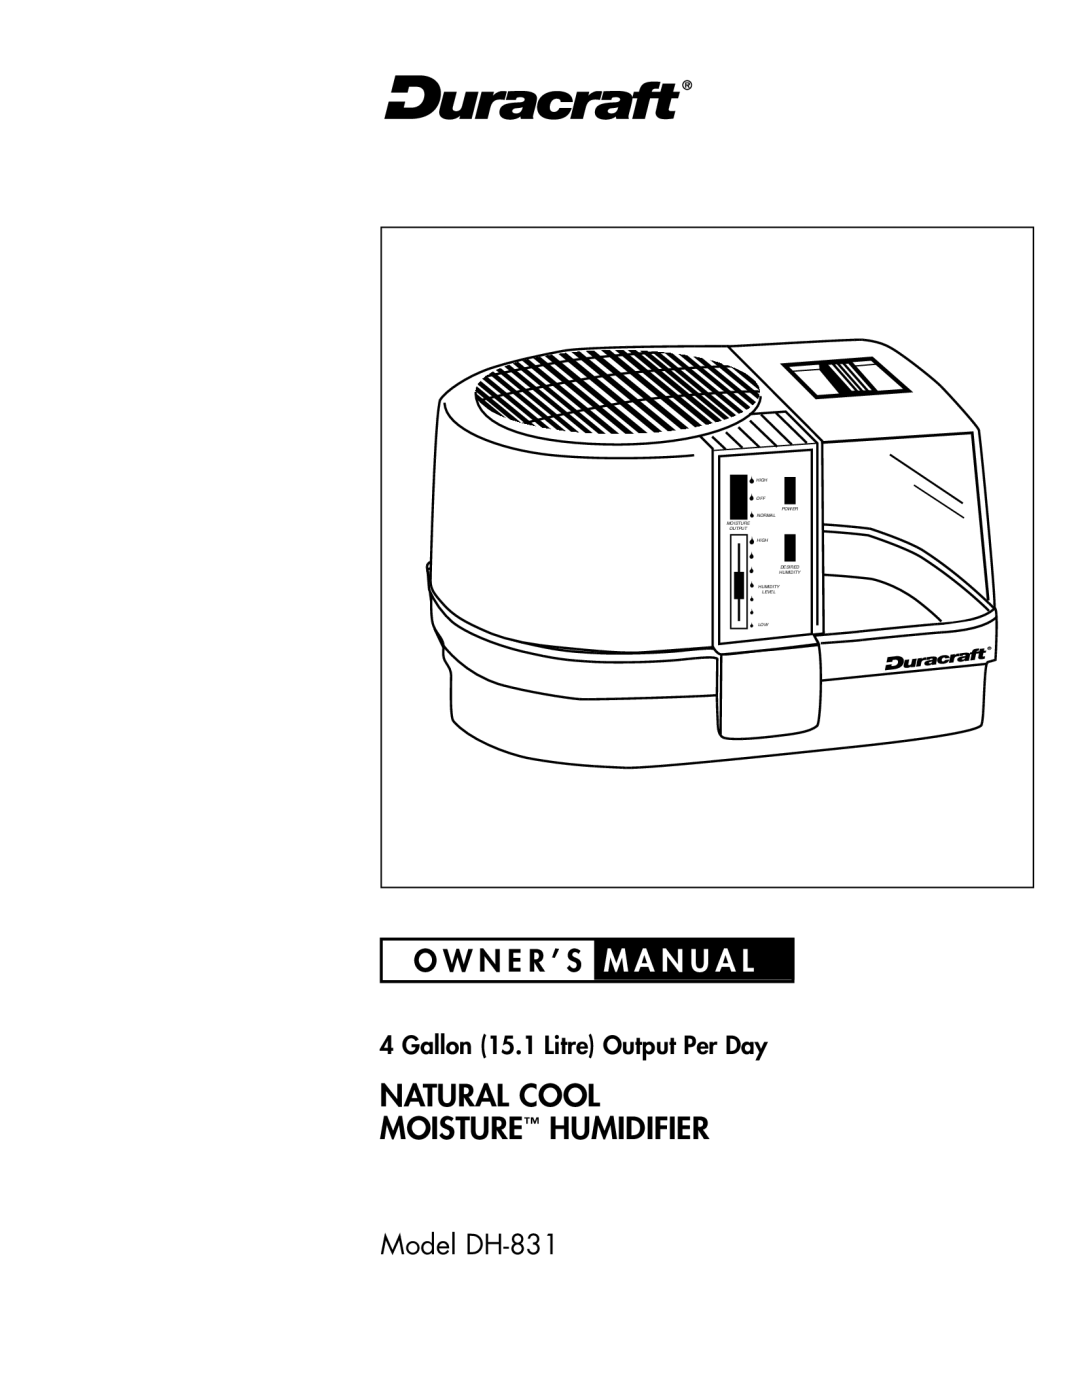 Duracraft DH-831 owner manual Natural Cool Moisture Humidifier, O W N E R ’ S M A N U A L, High, Power, Normal, Output 